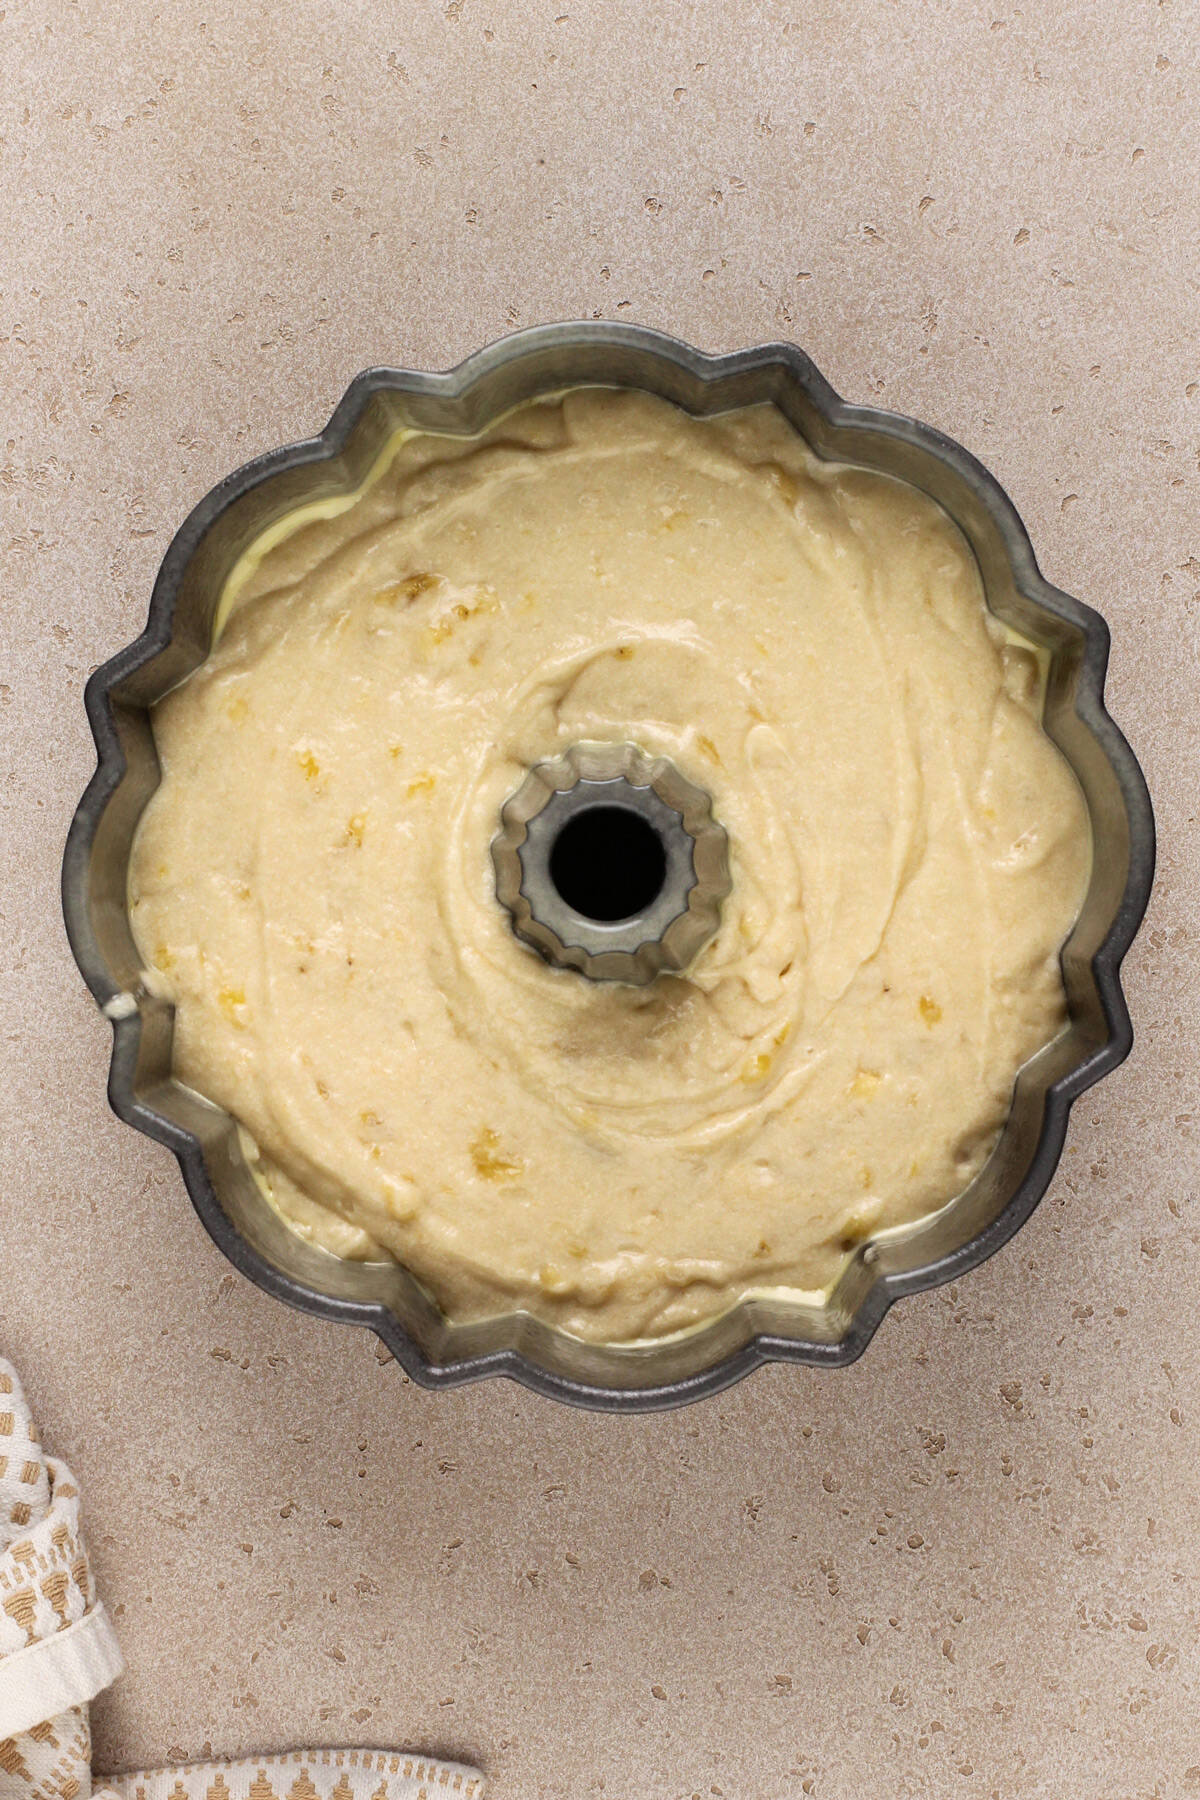 Banana bundt cake batter in a bundt pan, ready to go in the oven.